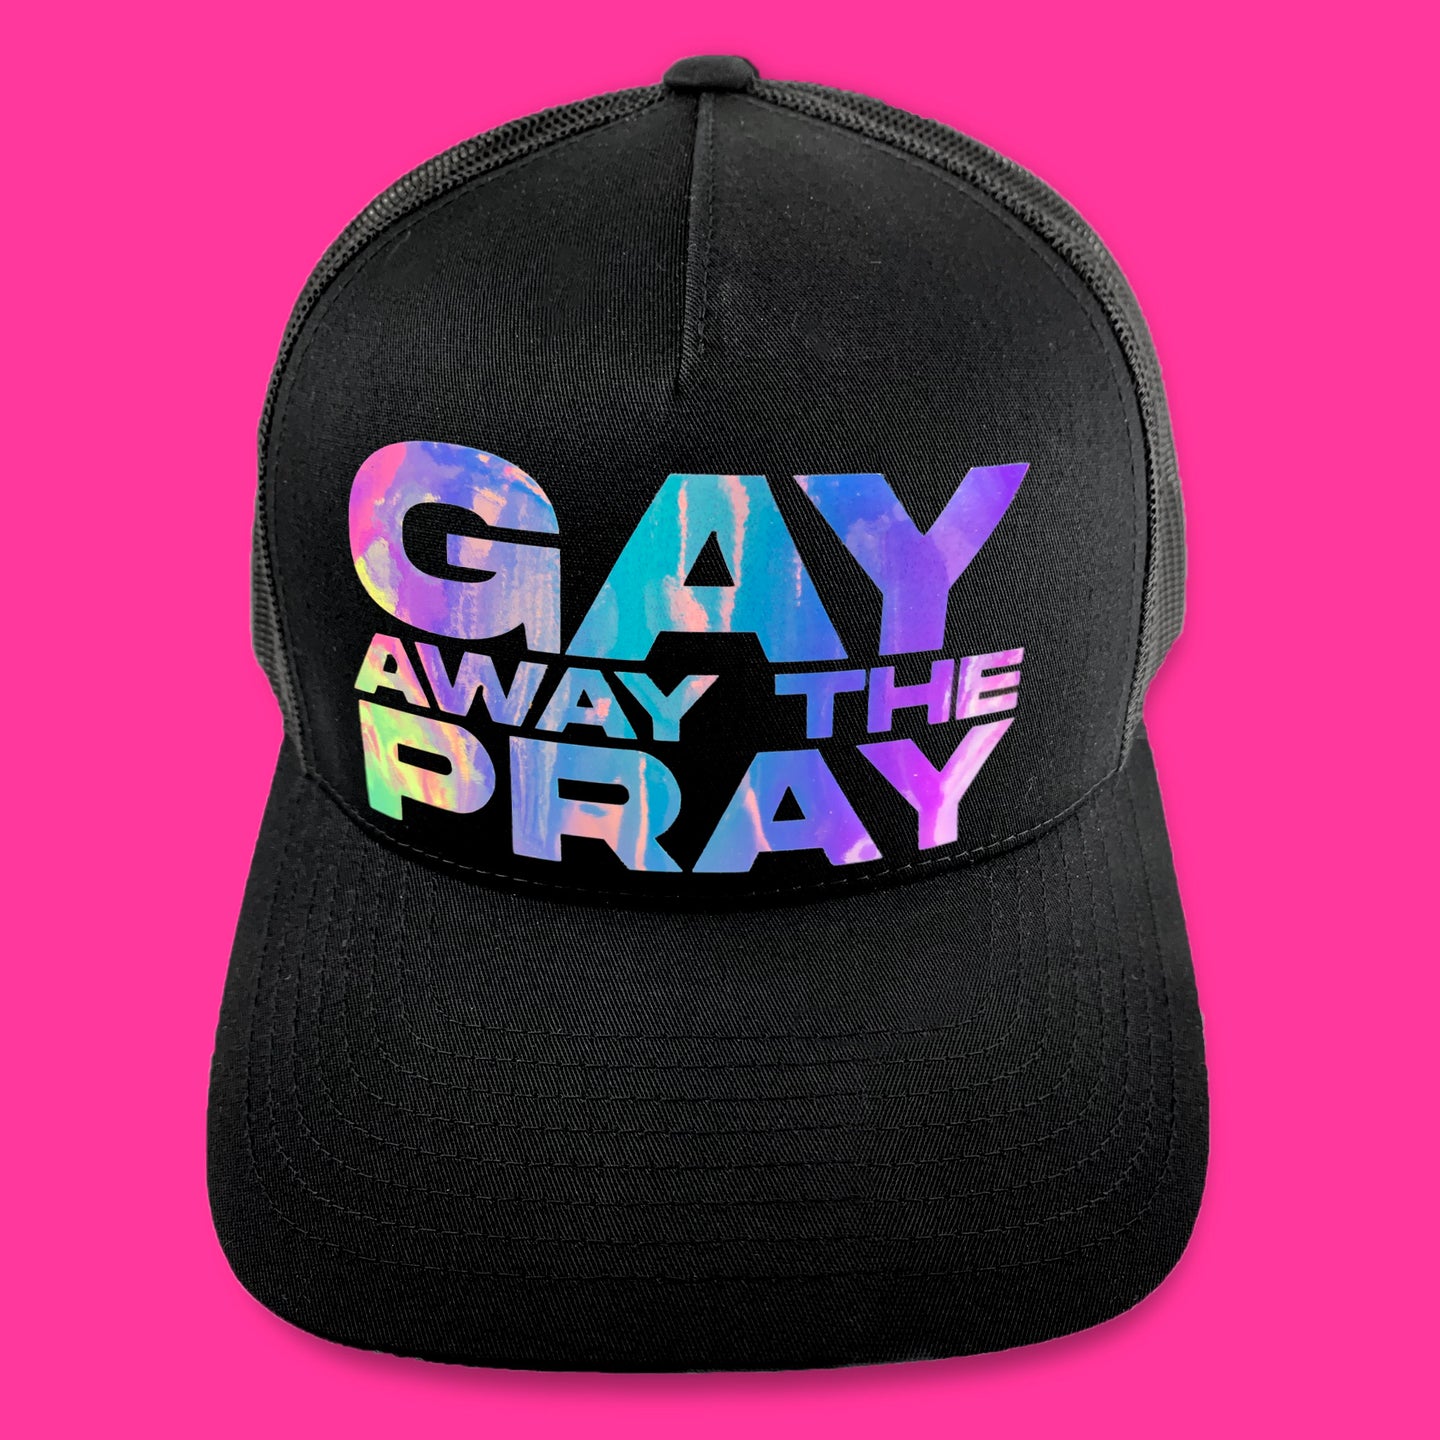 Gay Away The Pray ball cap - unisex black snapback hat with holographic pearl text by BBJ / Glitter Garage